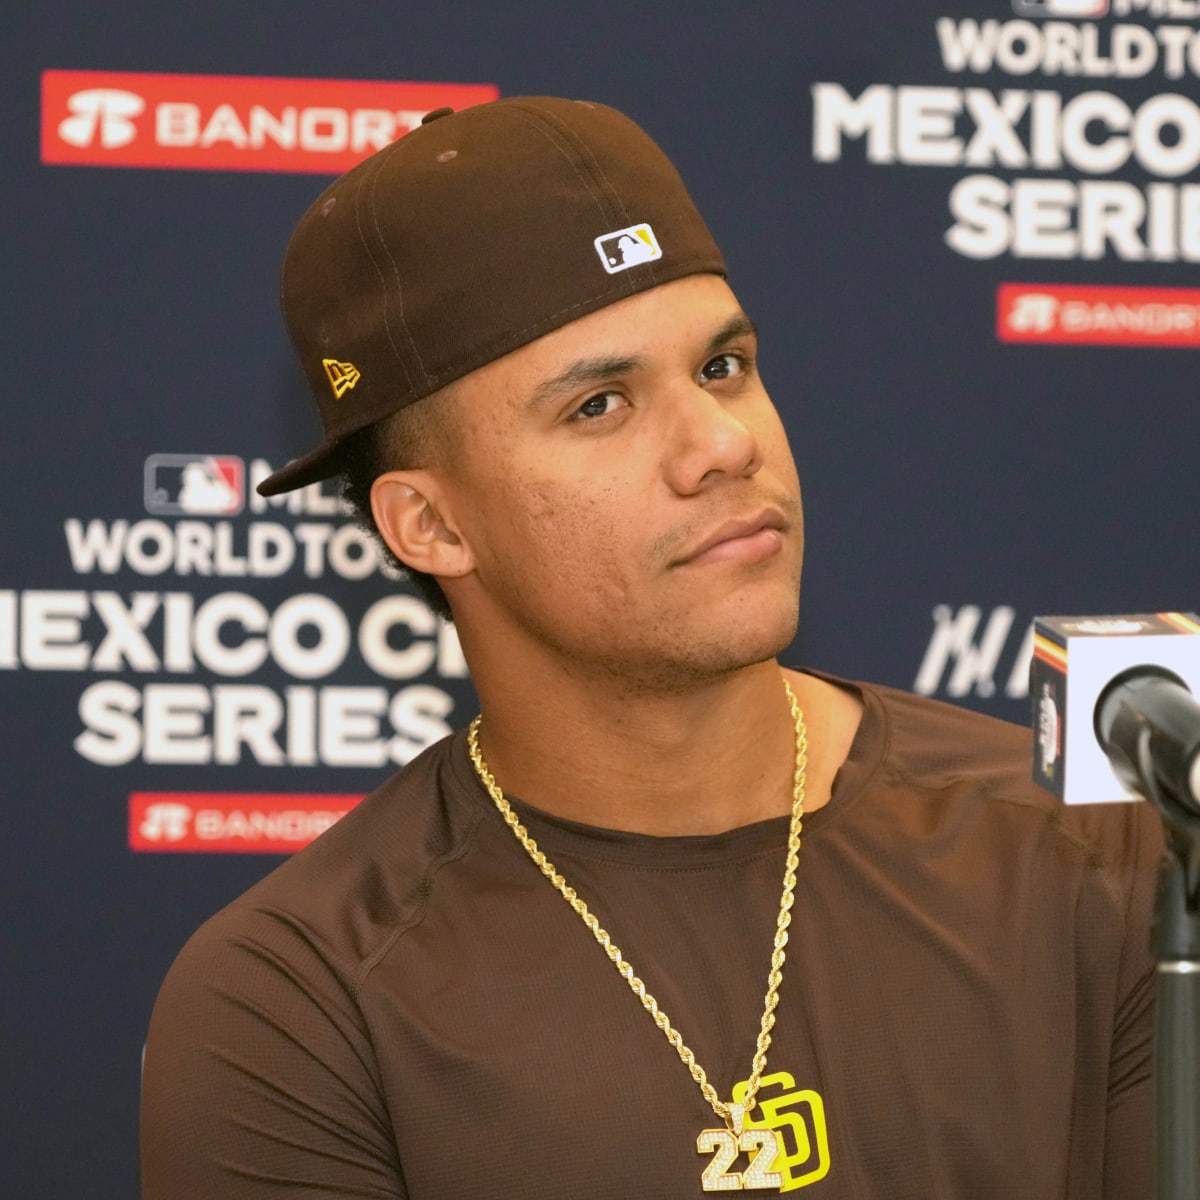 Padres signing Soto not seen as likely, but not impossible - The